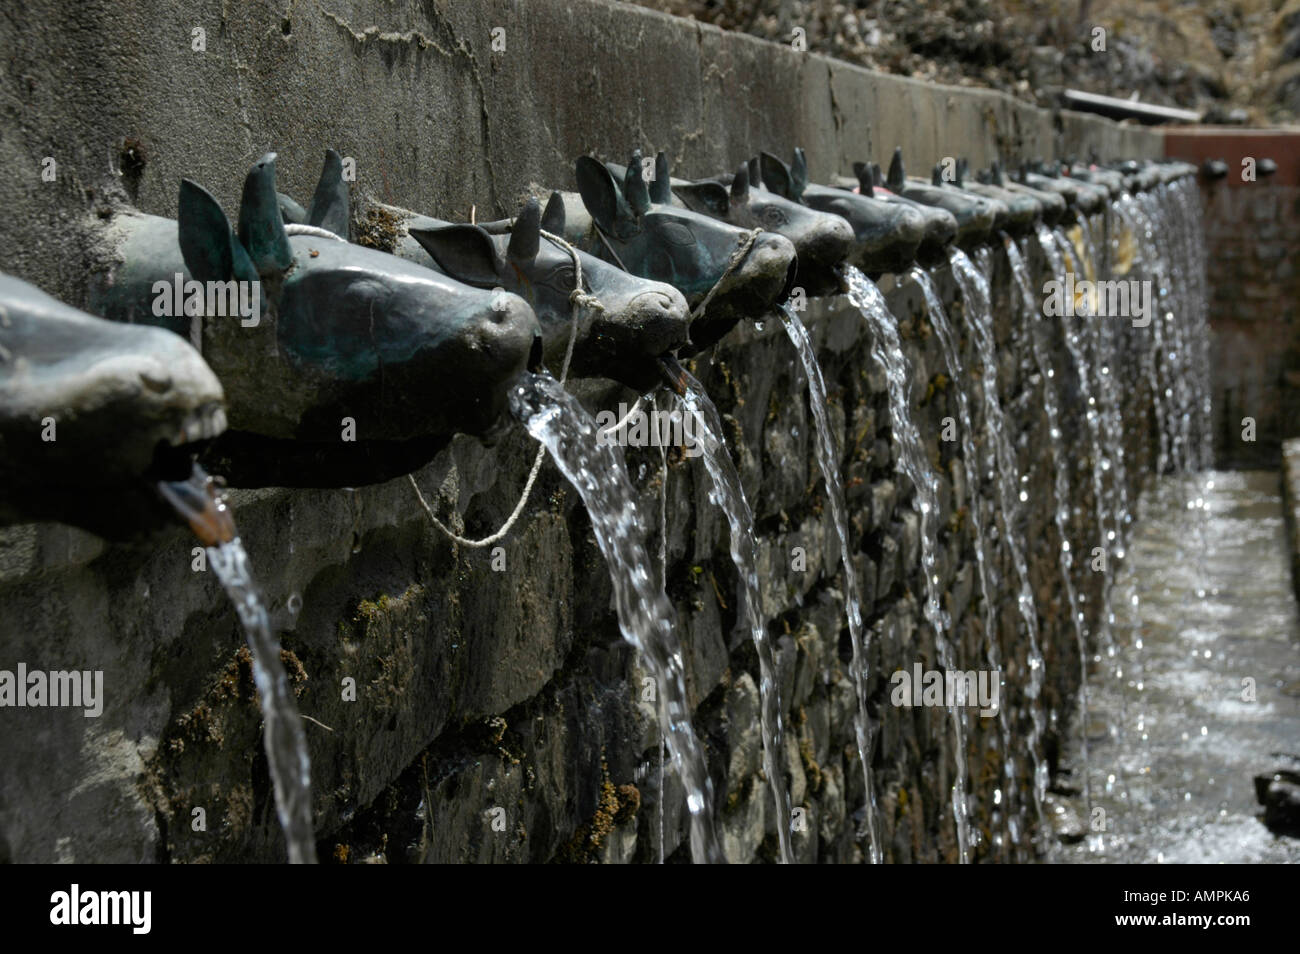 Source water flows out of animal head brass water spouts Vishnu Temple Muktinath Mustang Annapurna Region Nepal Stock Photo